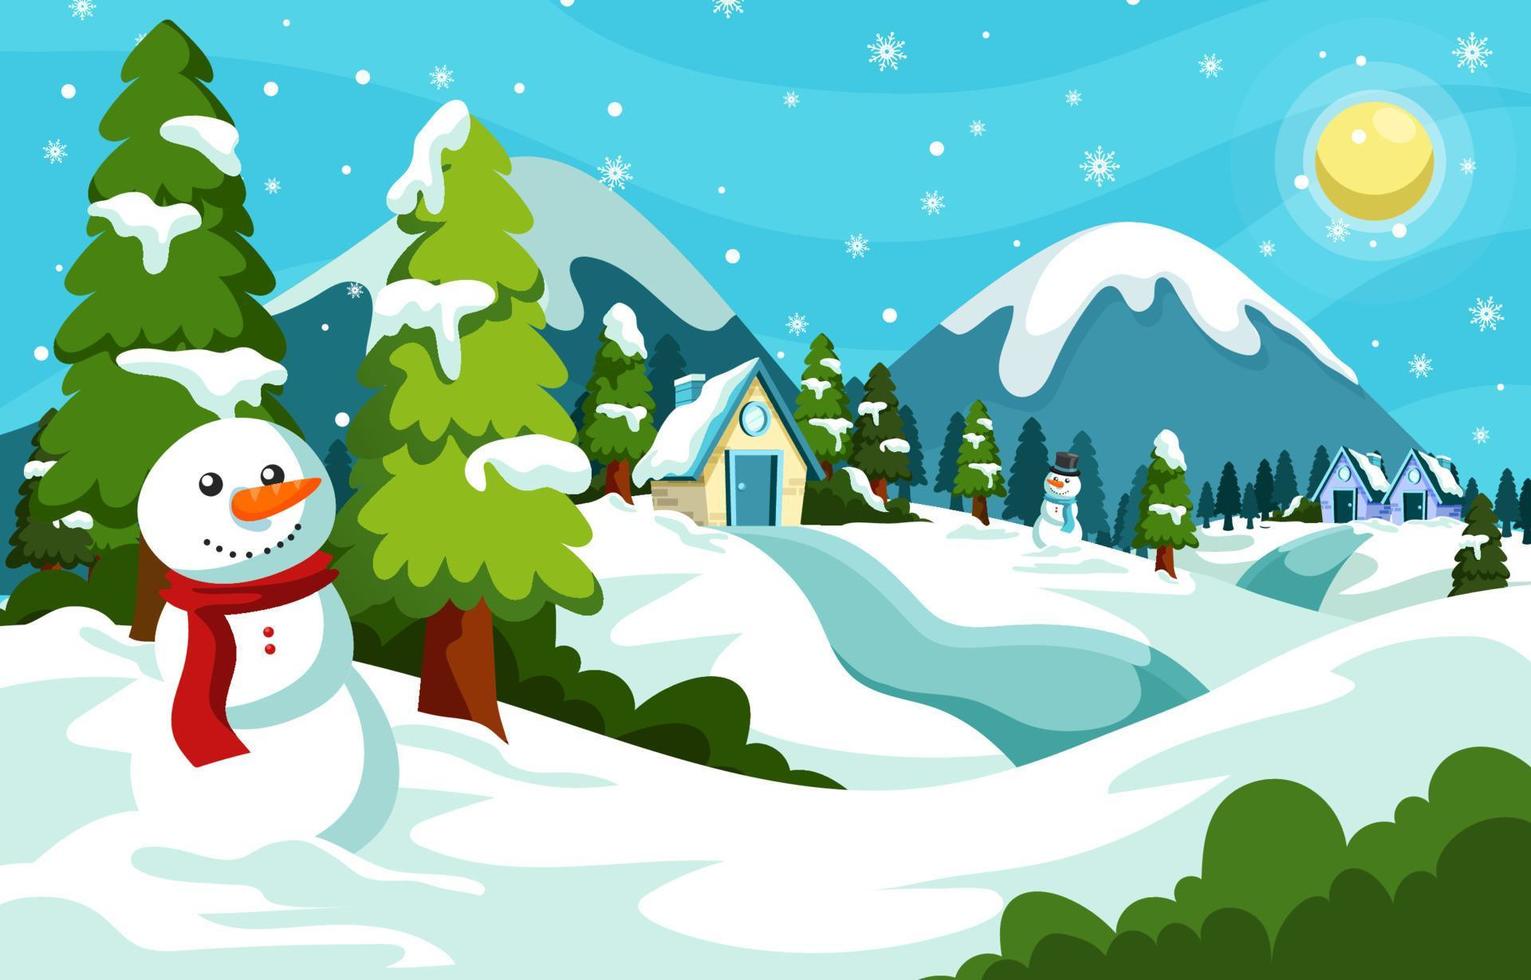 Winter Morning Scenery on the Forest with Snowman vector